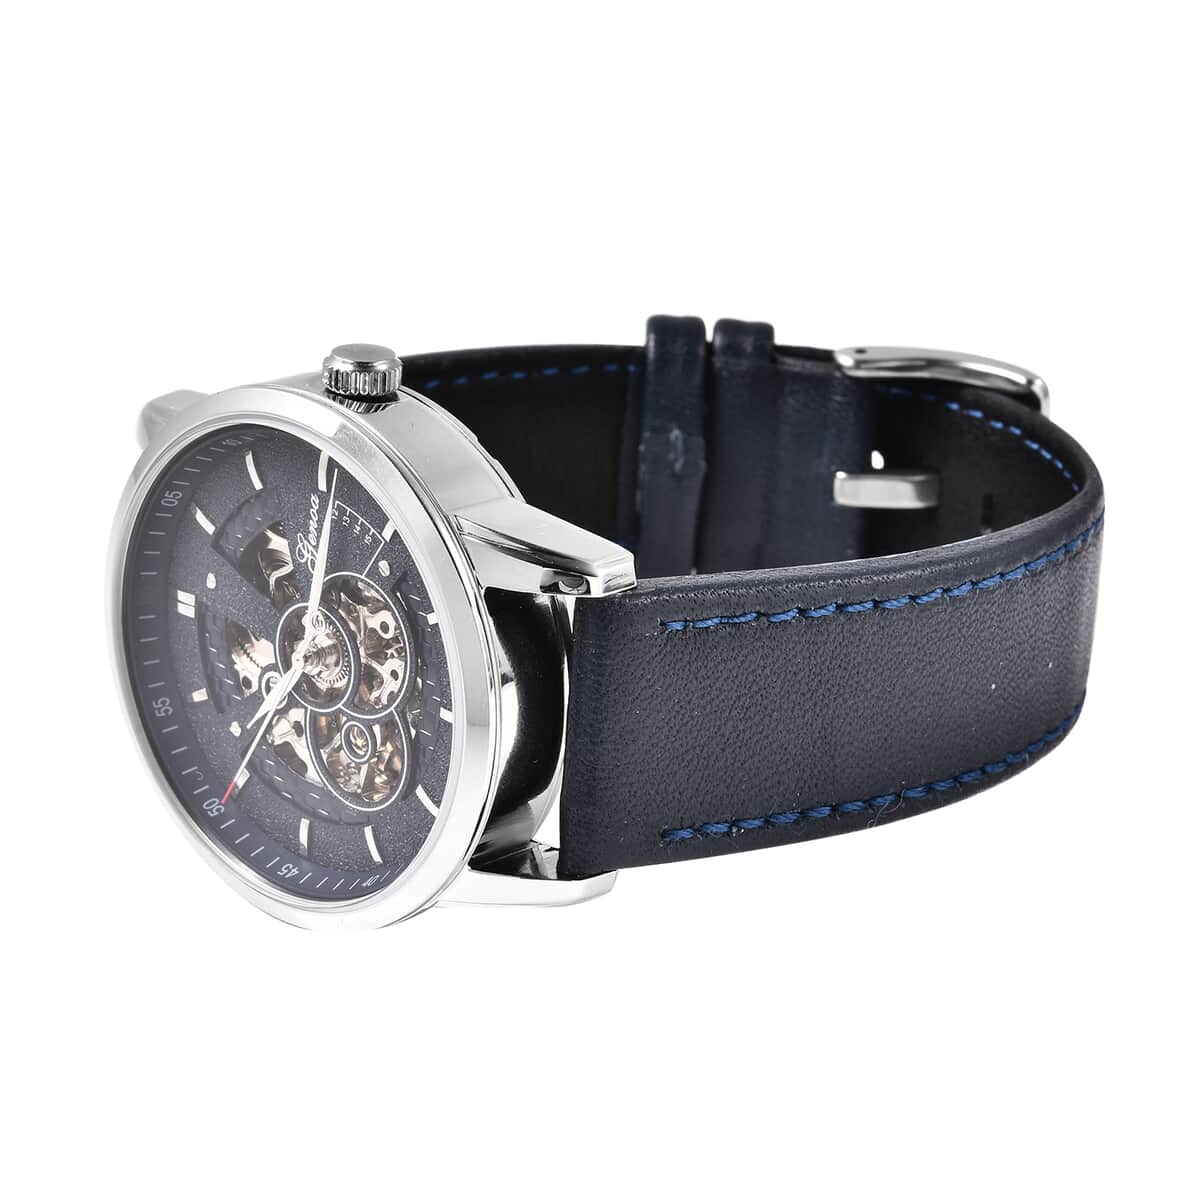 Genoa Automatic Movement Water Resistant Watch with Navy Blue Leather Band and Stainless Steel Back image number 3